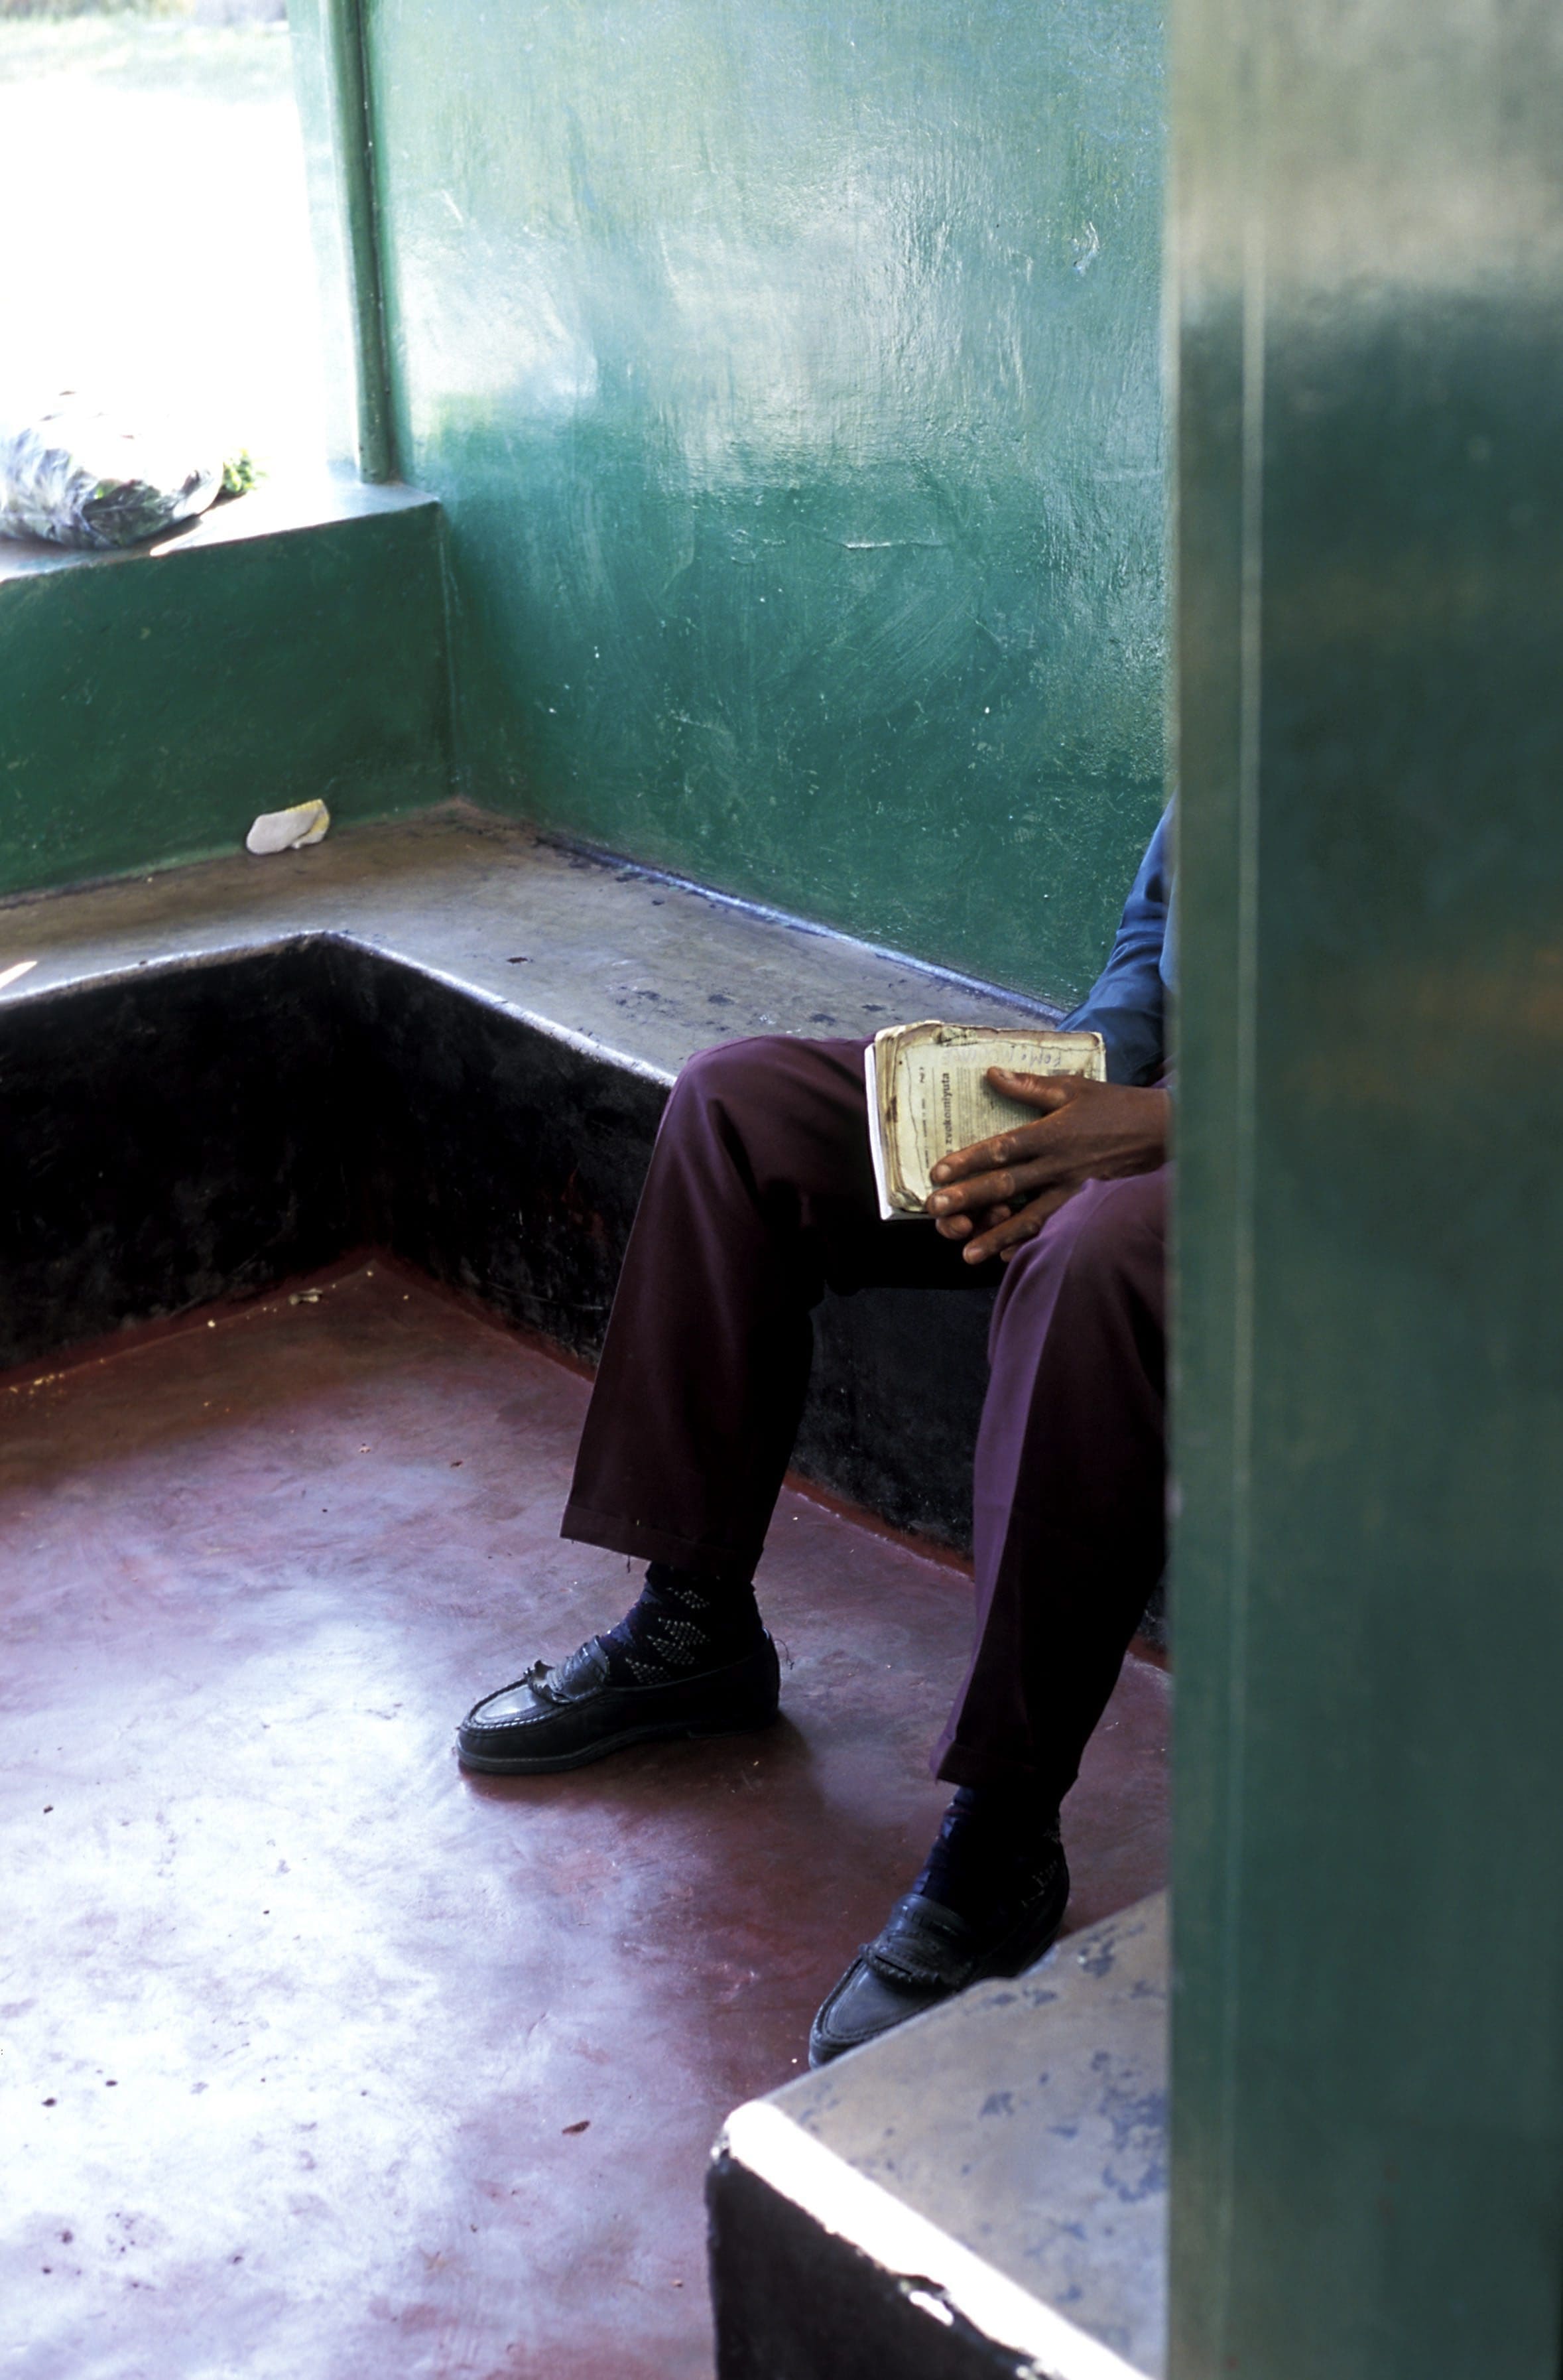 Lesotho: Palliative Care for Military Prisoners